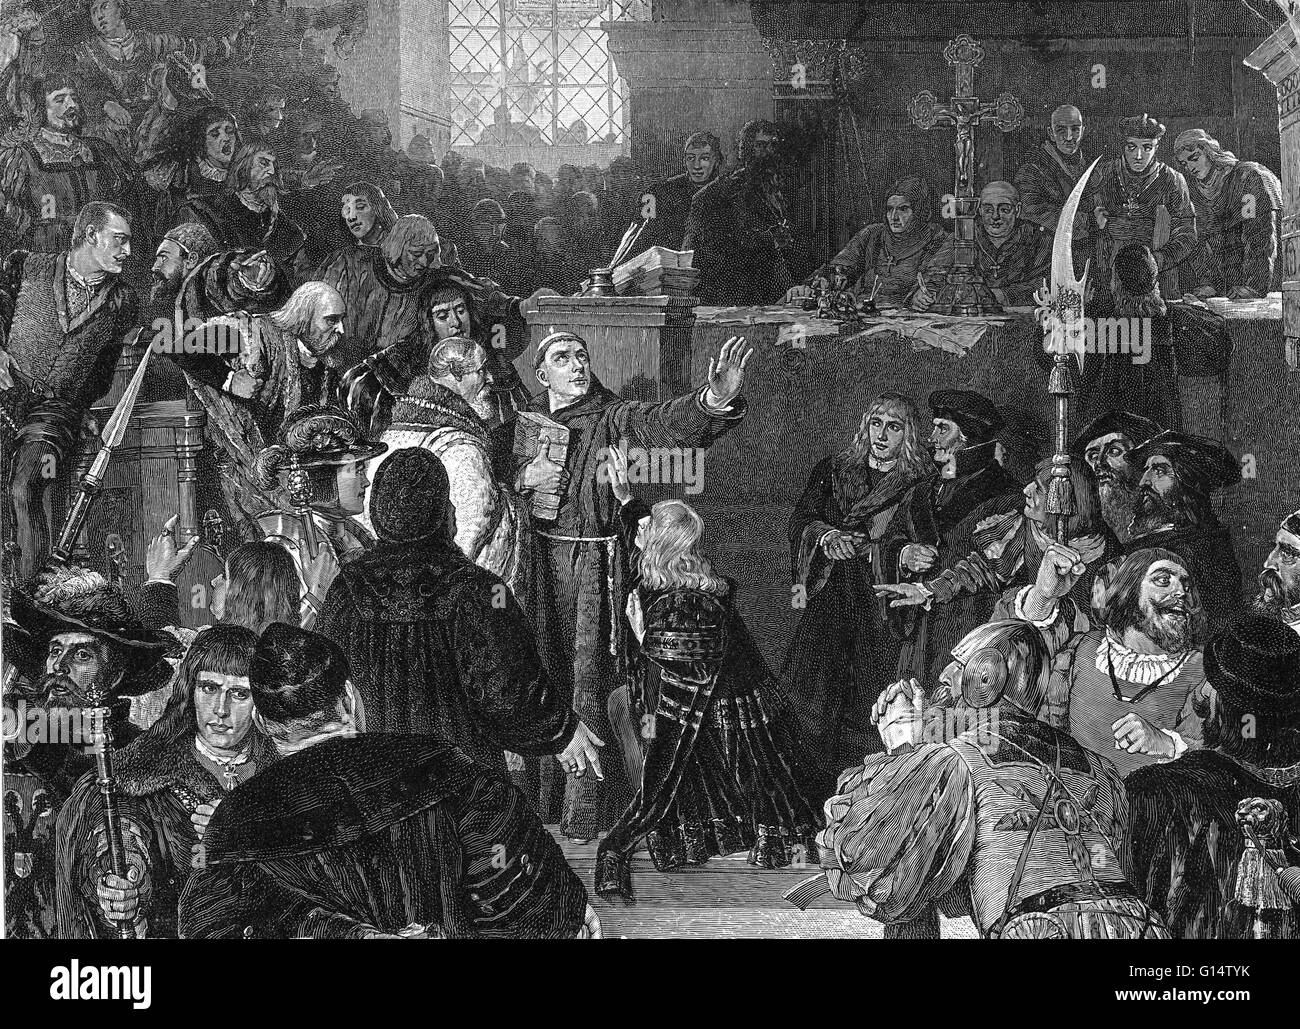 Martin Luther at the Imperial Diet of Worms (1521). Martin Luther (1483-1546) was a German priest, professor of theology and a major figure of the Protestant Reformation. He disputed the claim that freedom from God's punishment for sin could be purchased Stock Photo